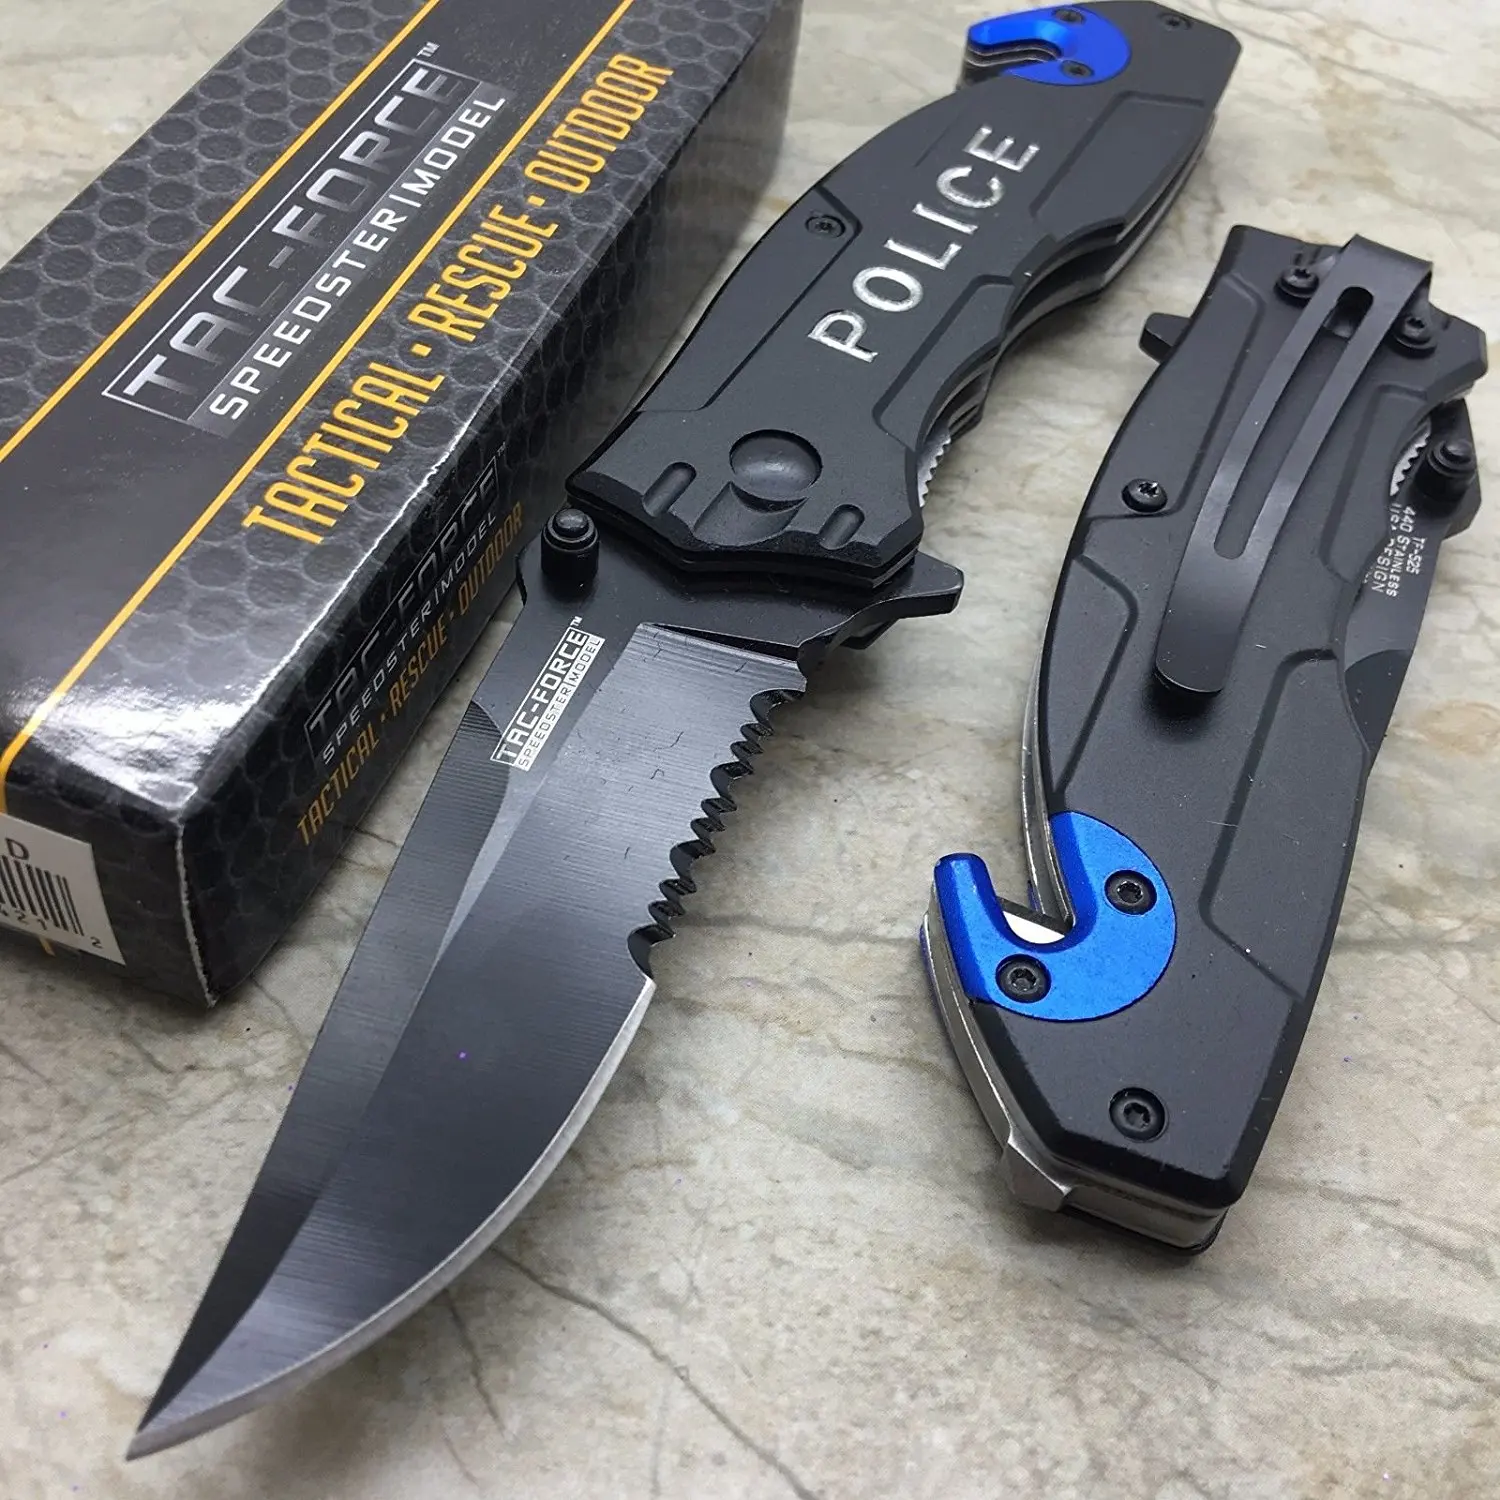 Cheap Tactical Police Knife, find Tactical Police Knife deals on line